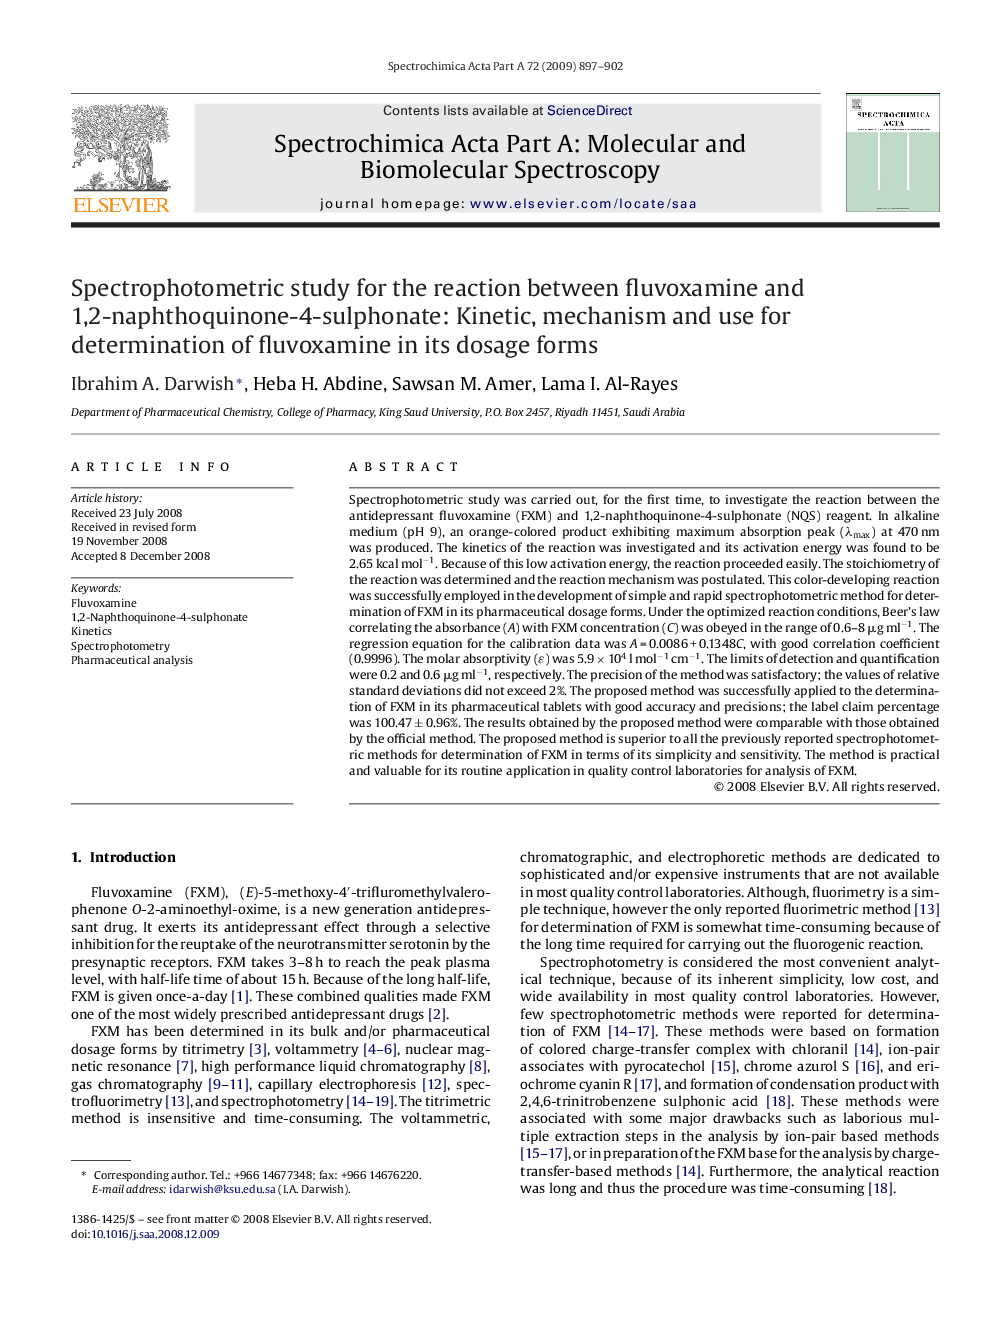 Spectrophotometric study for the reaction between fluvoxamine and 1,2-naphthoquinone-4-sulphonate: Kinetic, mechanism and use for determination of fluvoxamine in its dosage forms